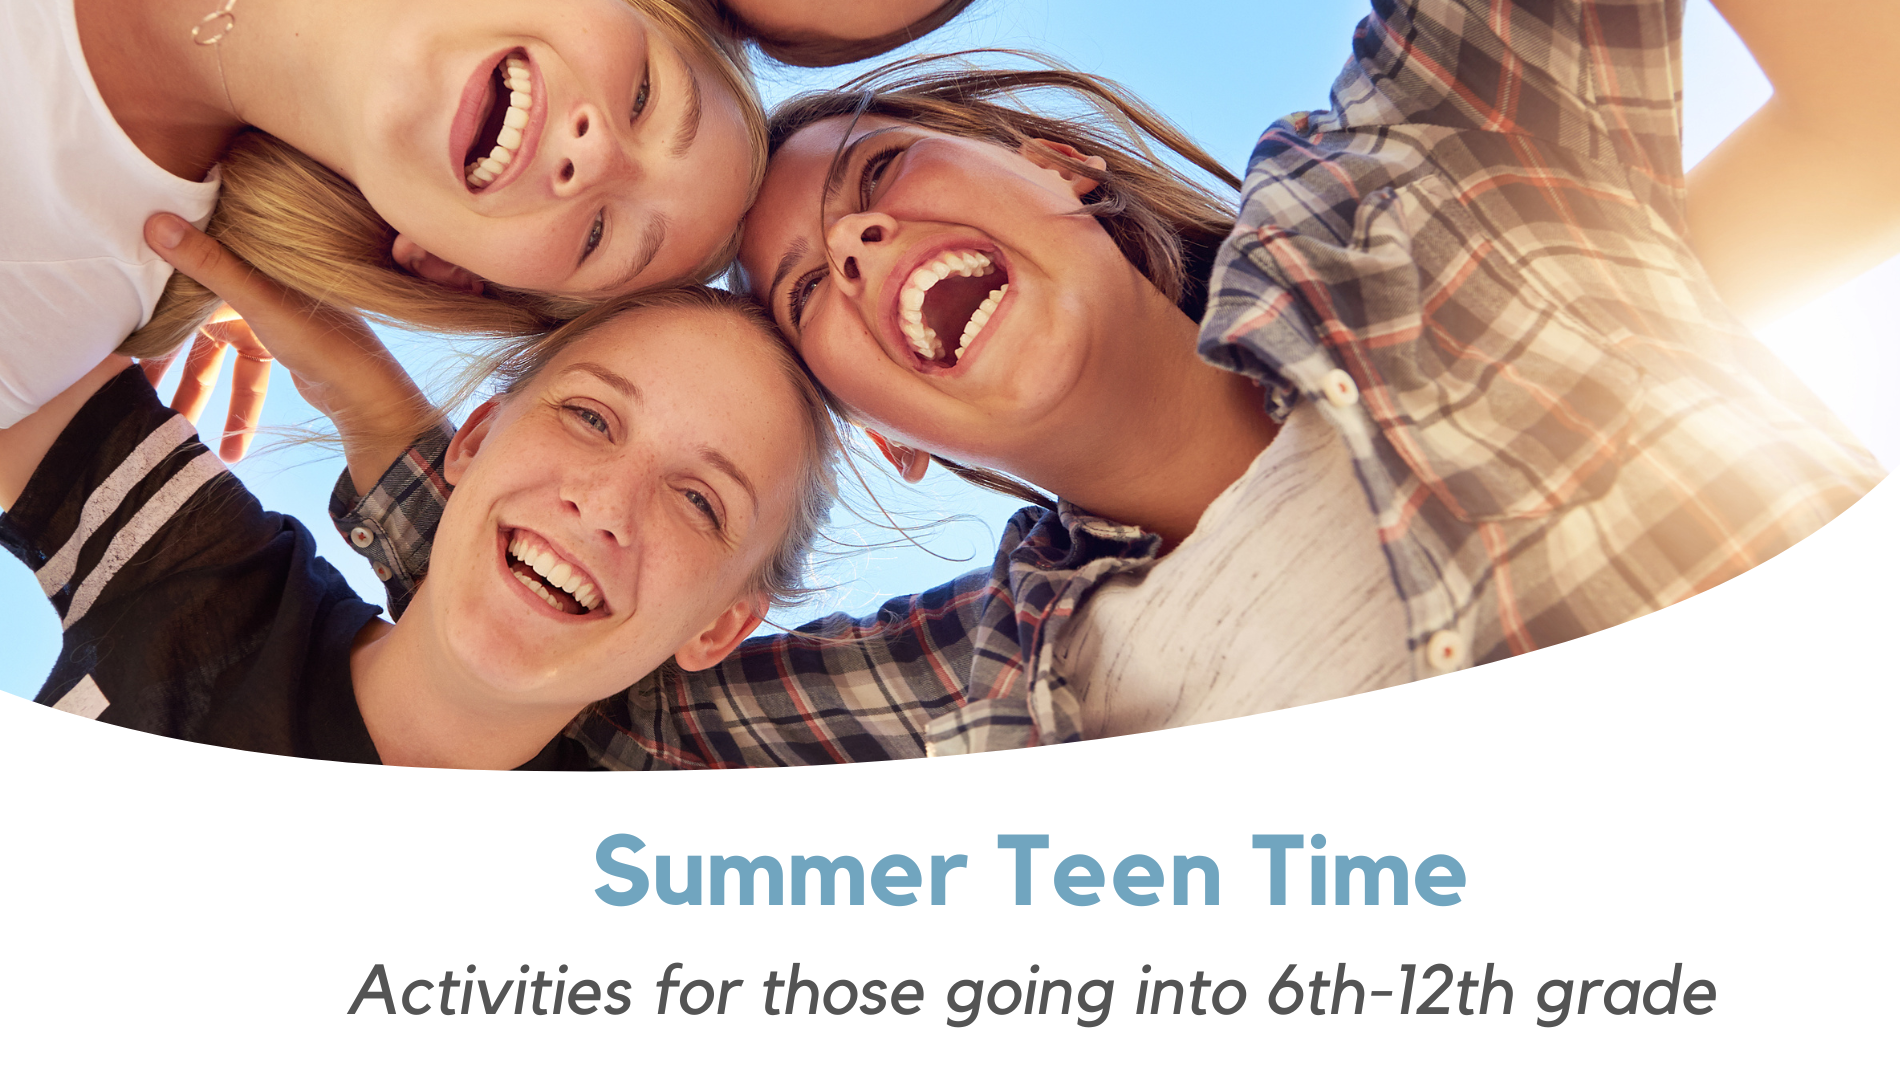 Our summer Teen Time activities are for those going into 6th-12th grade.